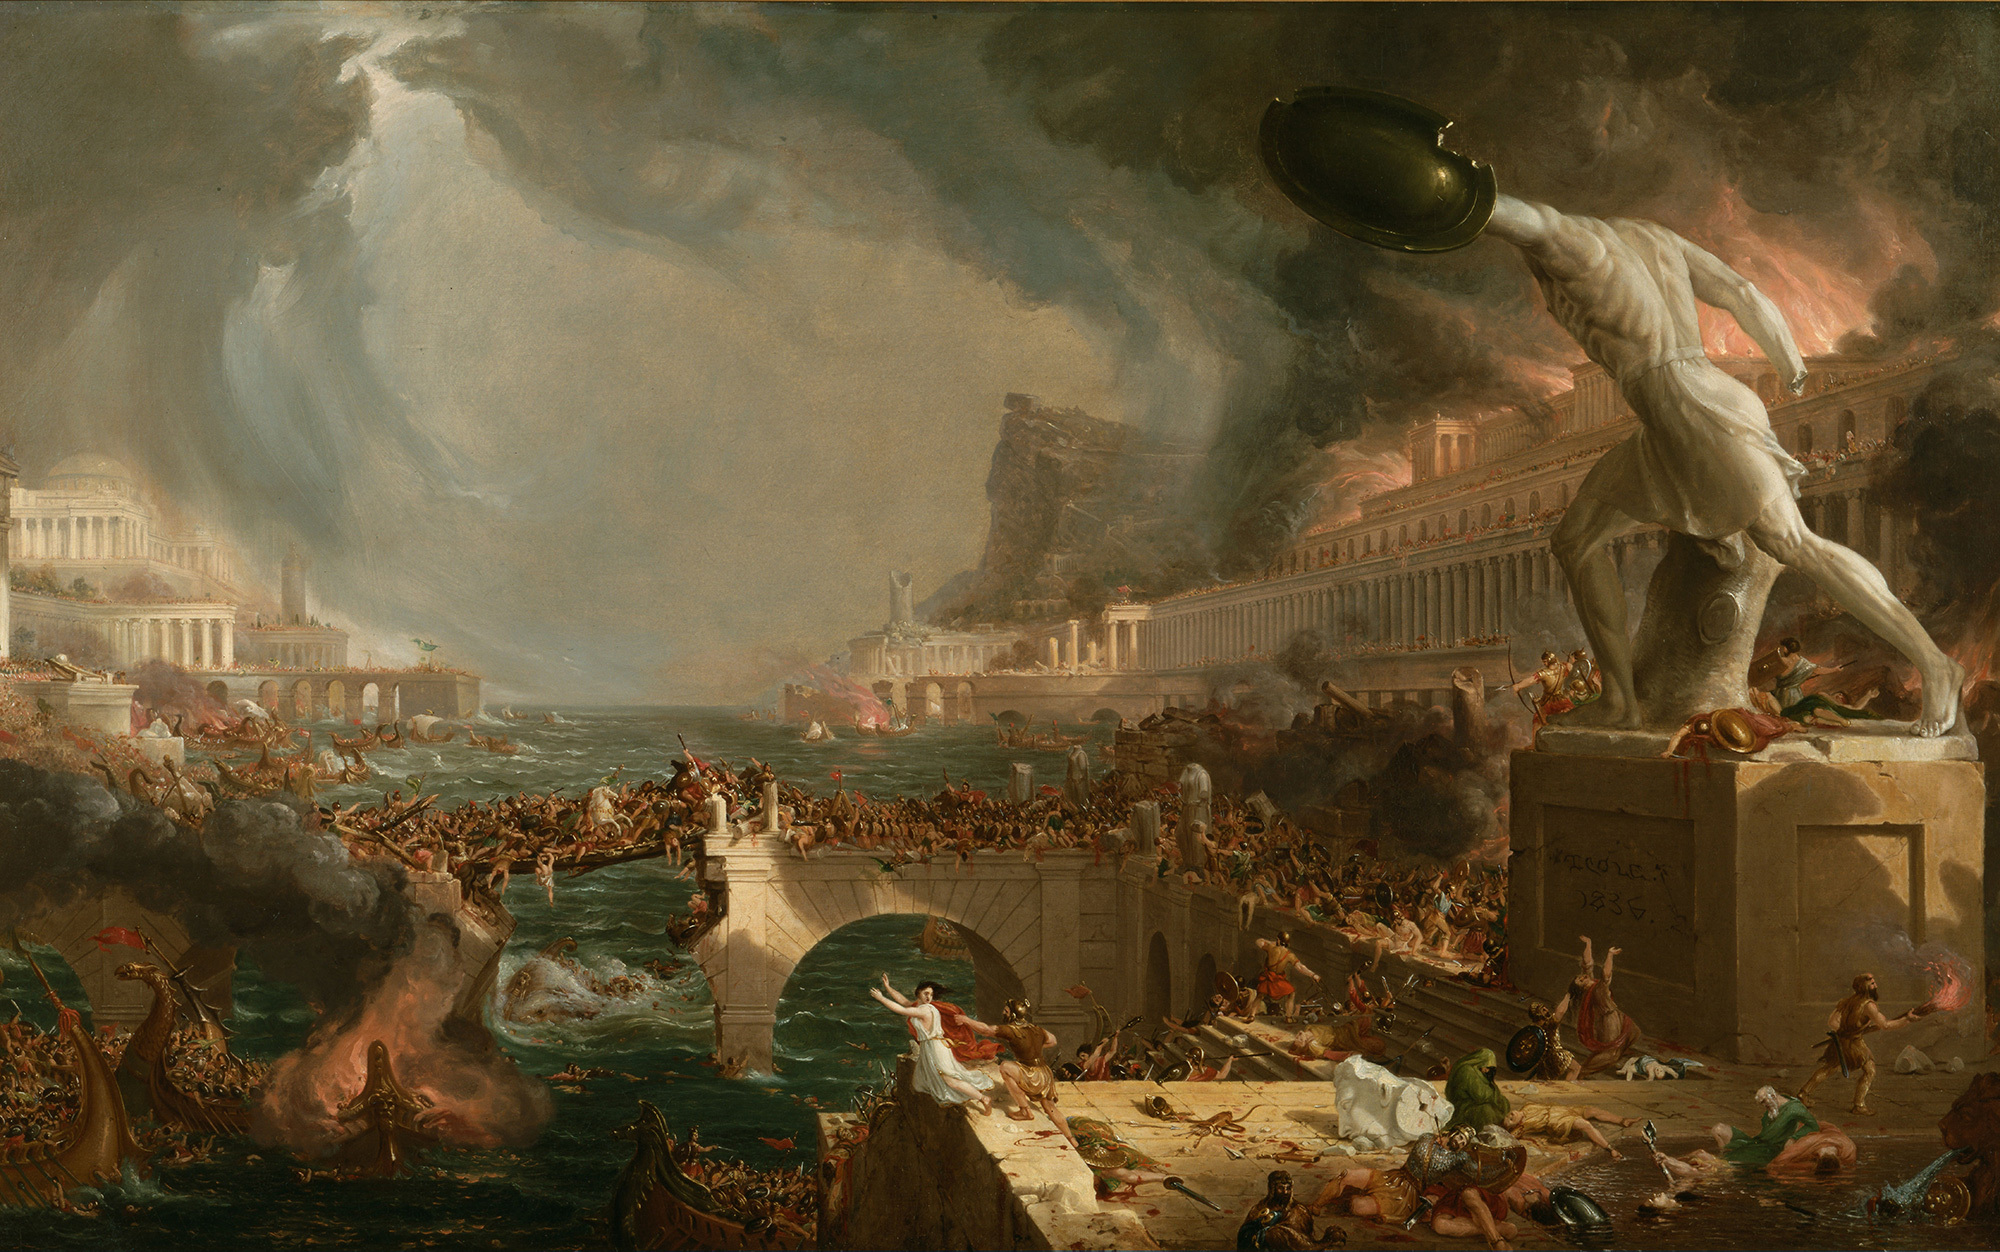 How the fall of the Roman empire paved the road to modernity